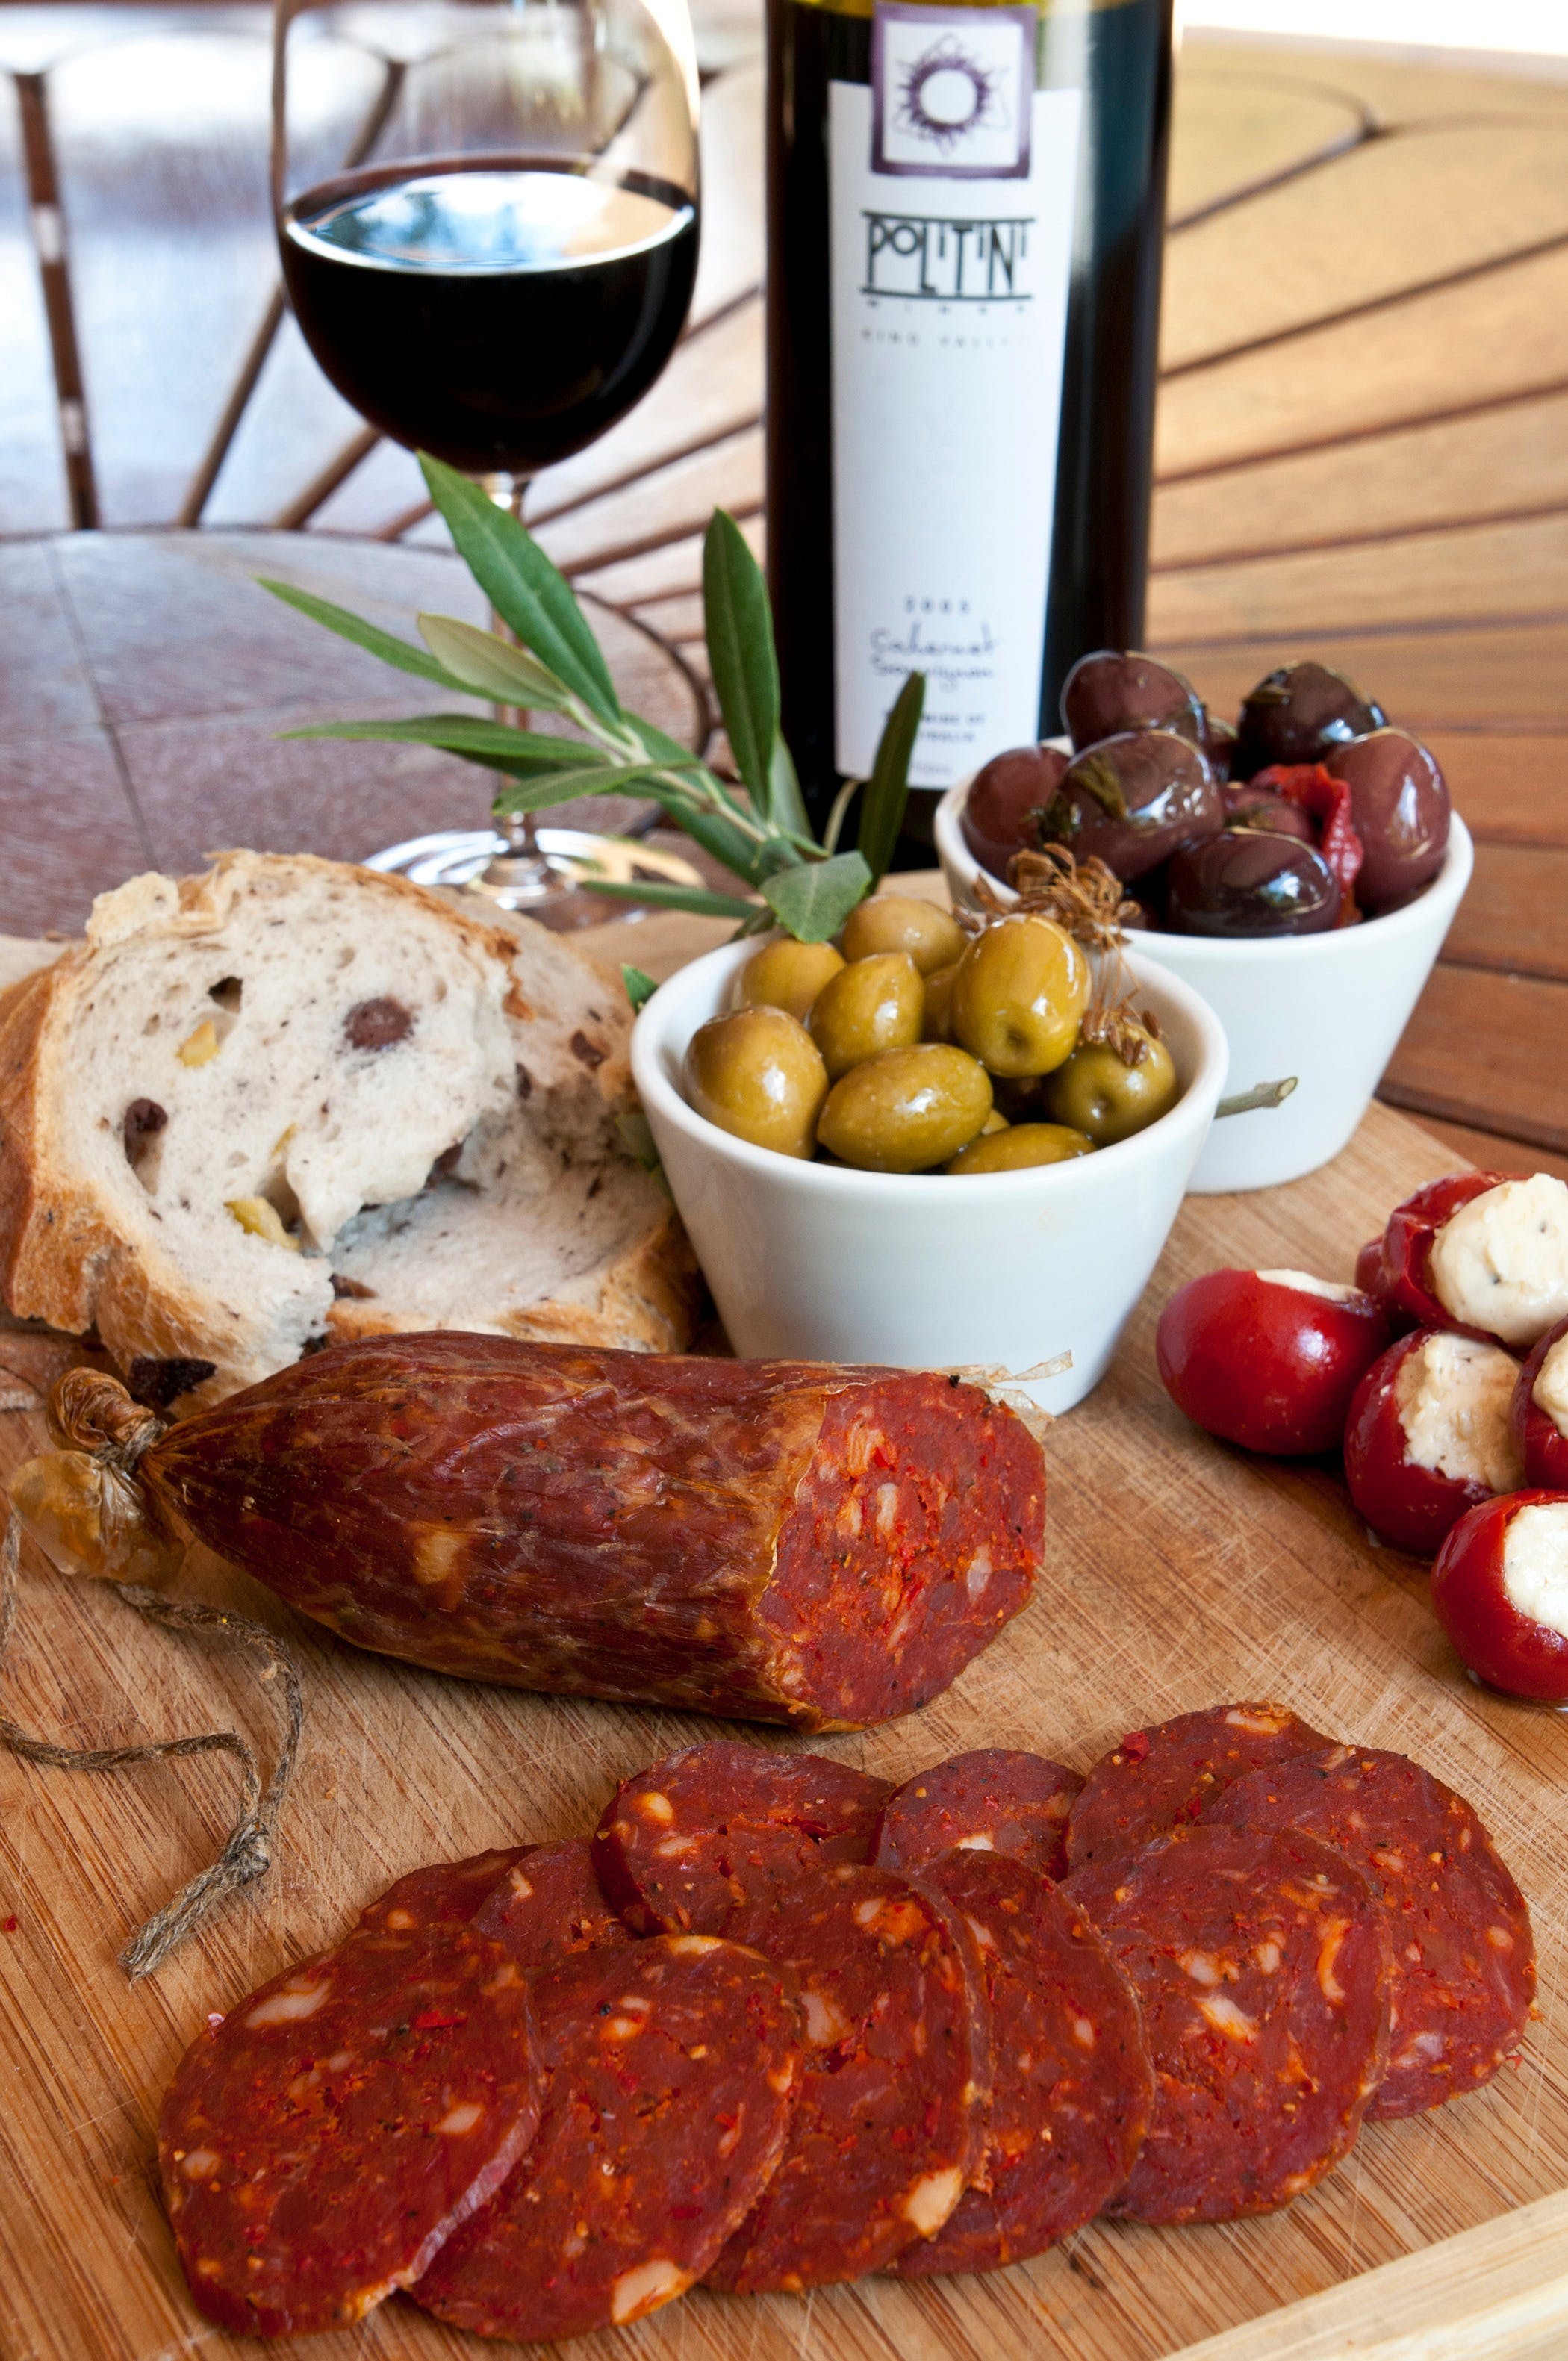 Salami and Salsicce Making classes at Politini Wines - Accommodation Mt Buller